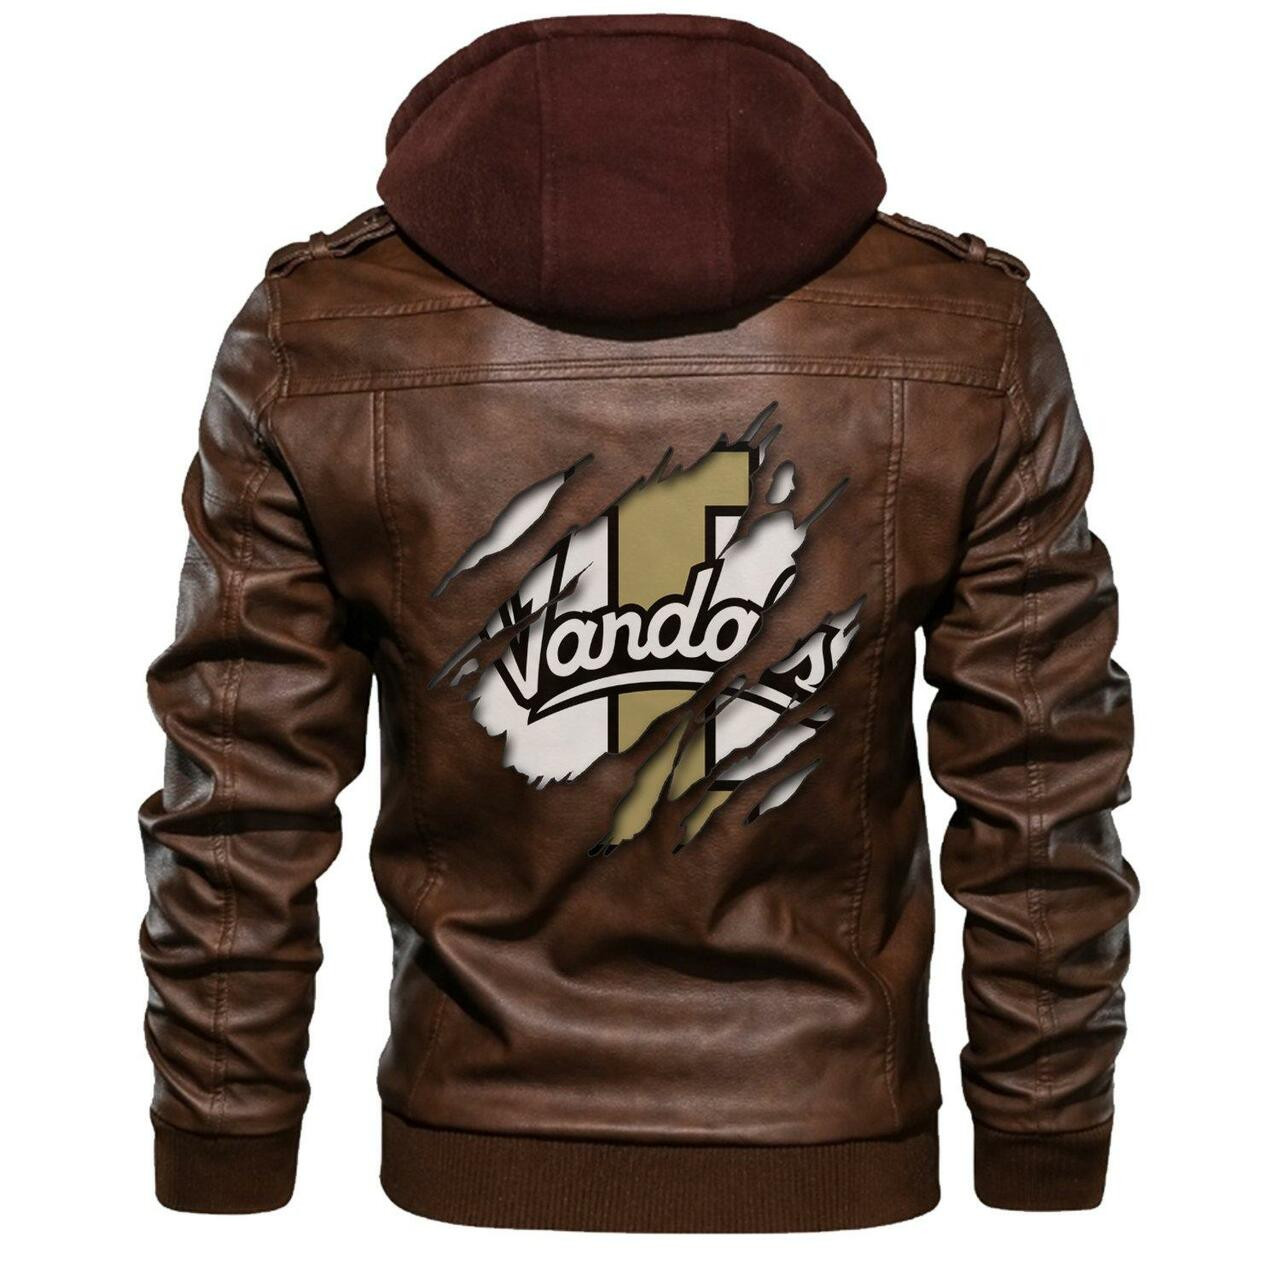 This leather Jacket will look great on you and make you stand out from the crowd 149